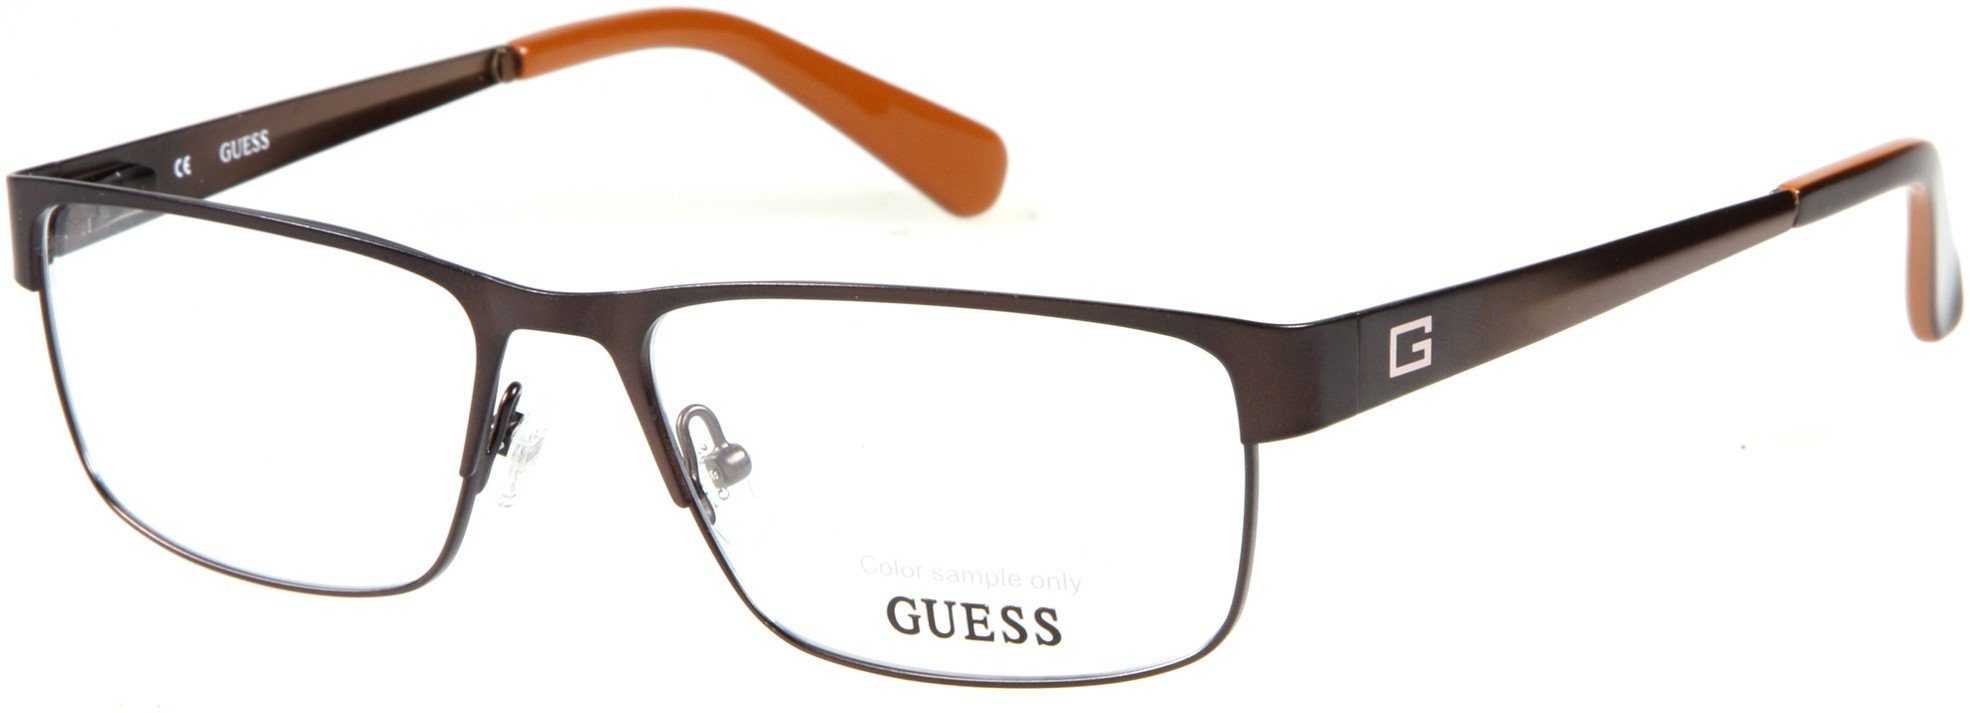 Guess 1770